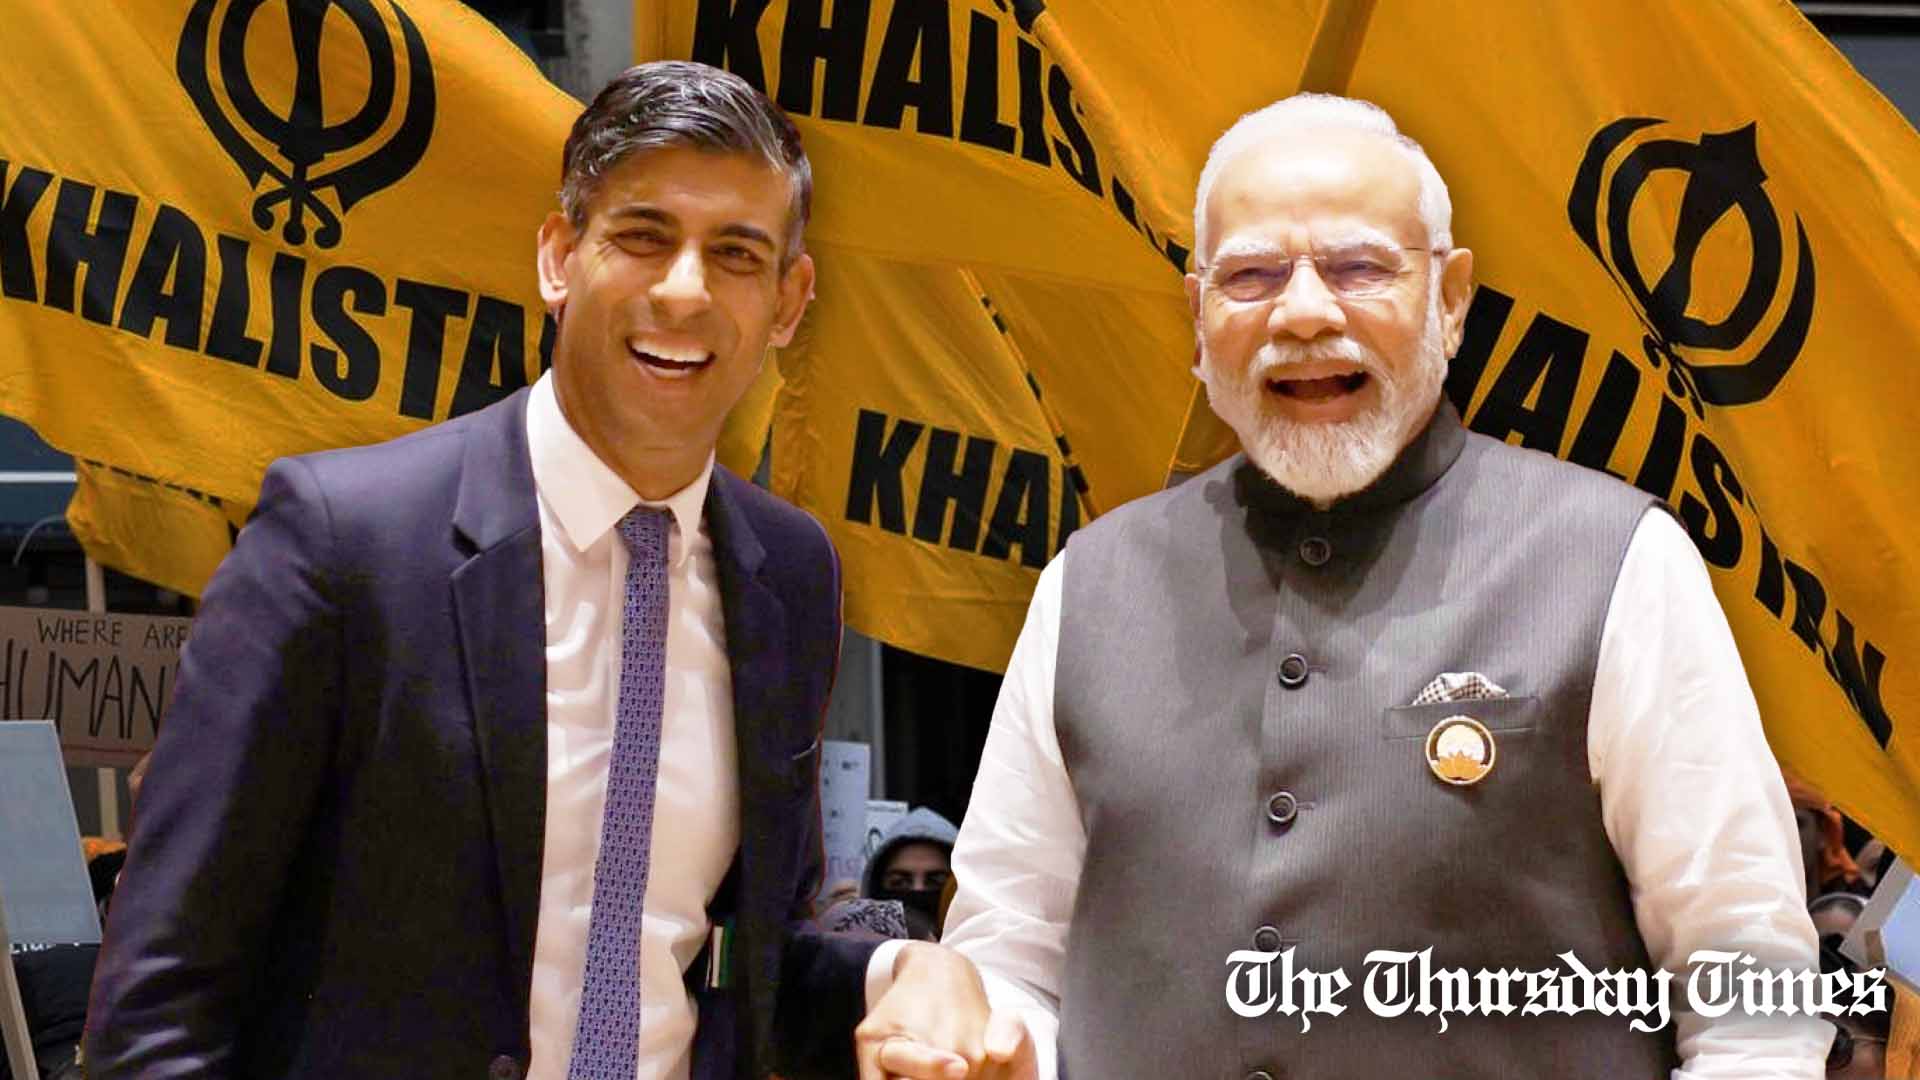 A file photo is shown of British prime minister Rishi Sunak (L) with Bharati prime minister Narendra Modi (R) atop a backdrop of a Khalistan protest. — FILE/THE THURSDAY TIMES